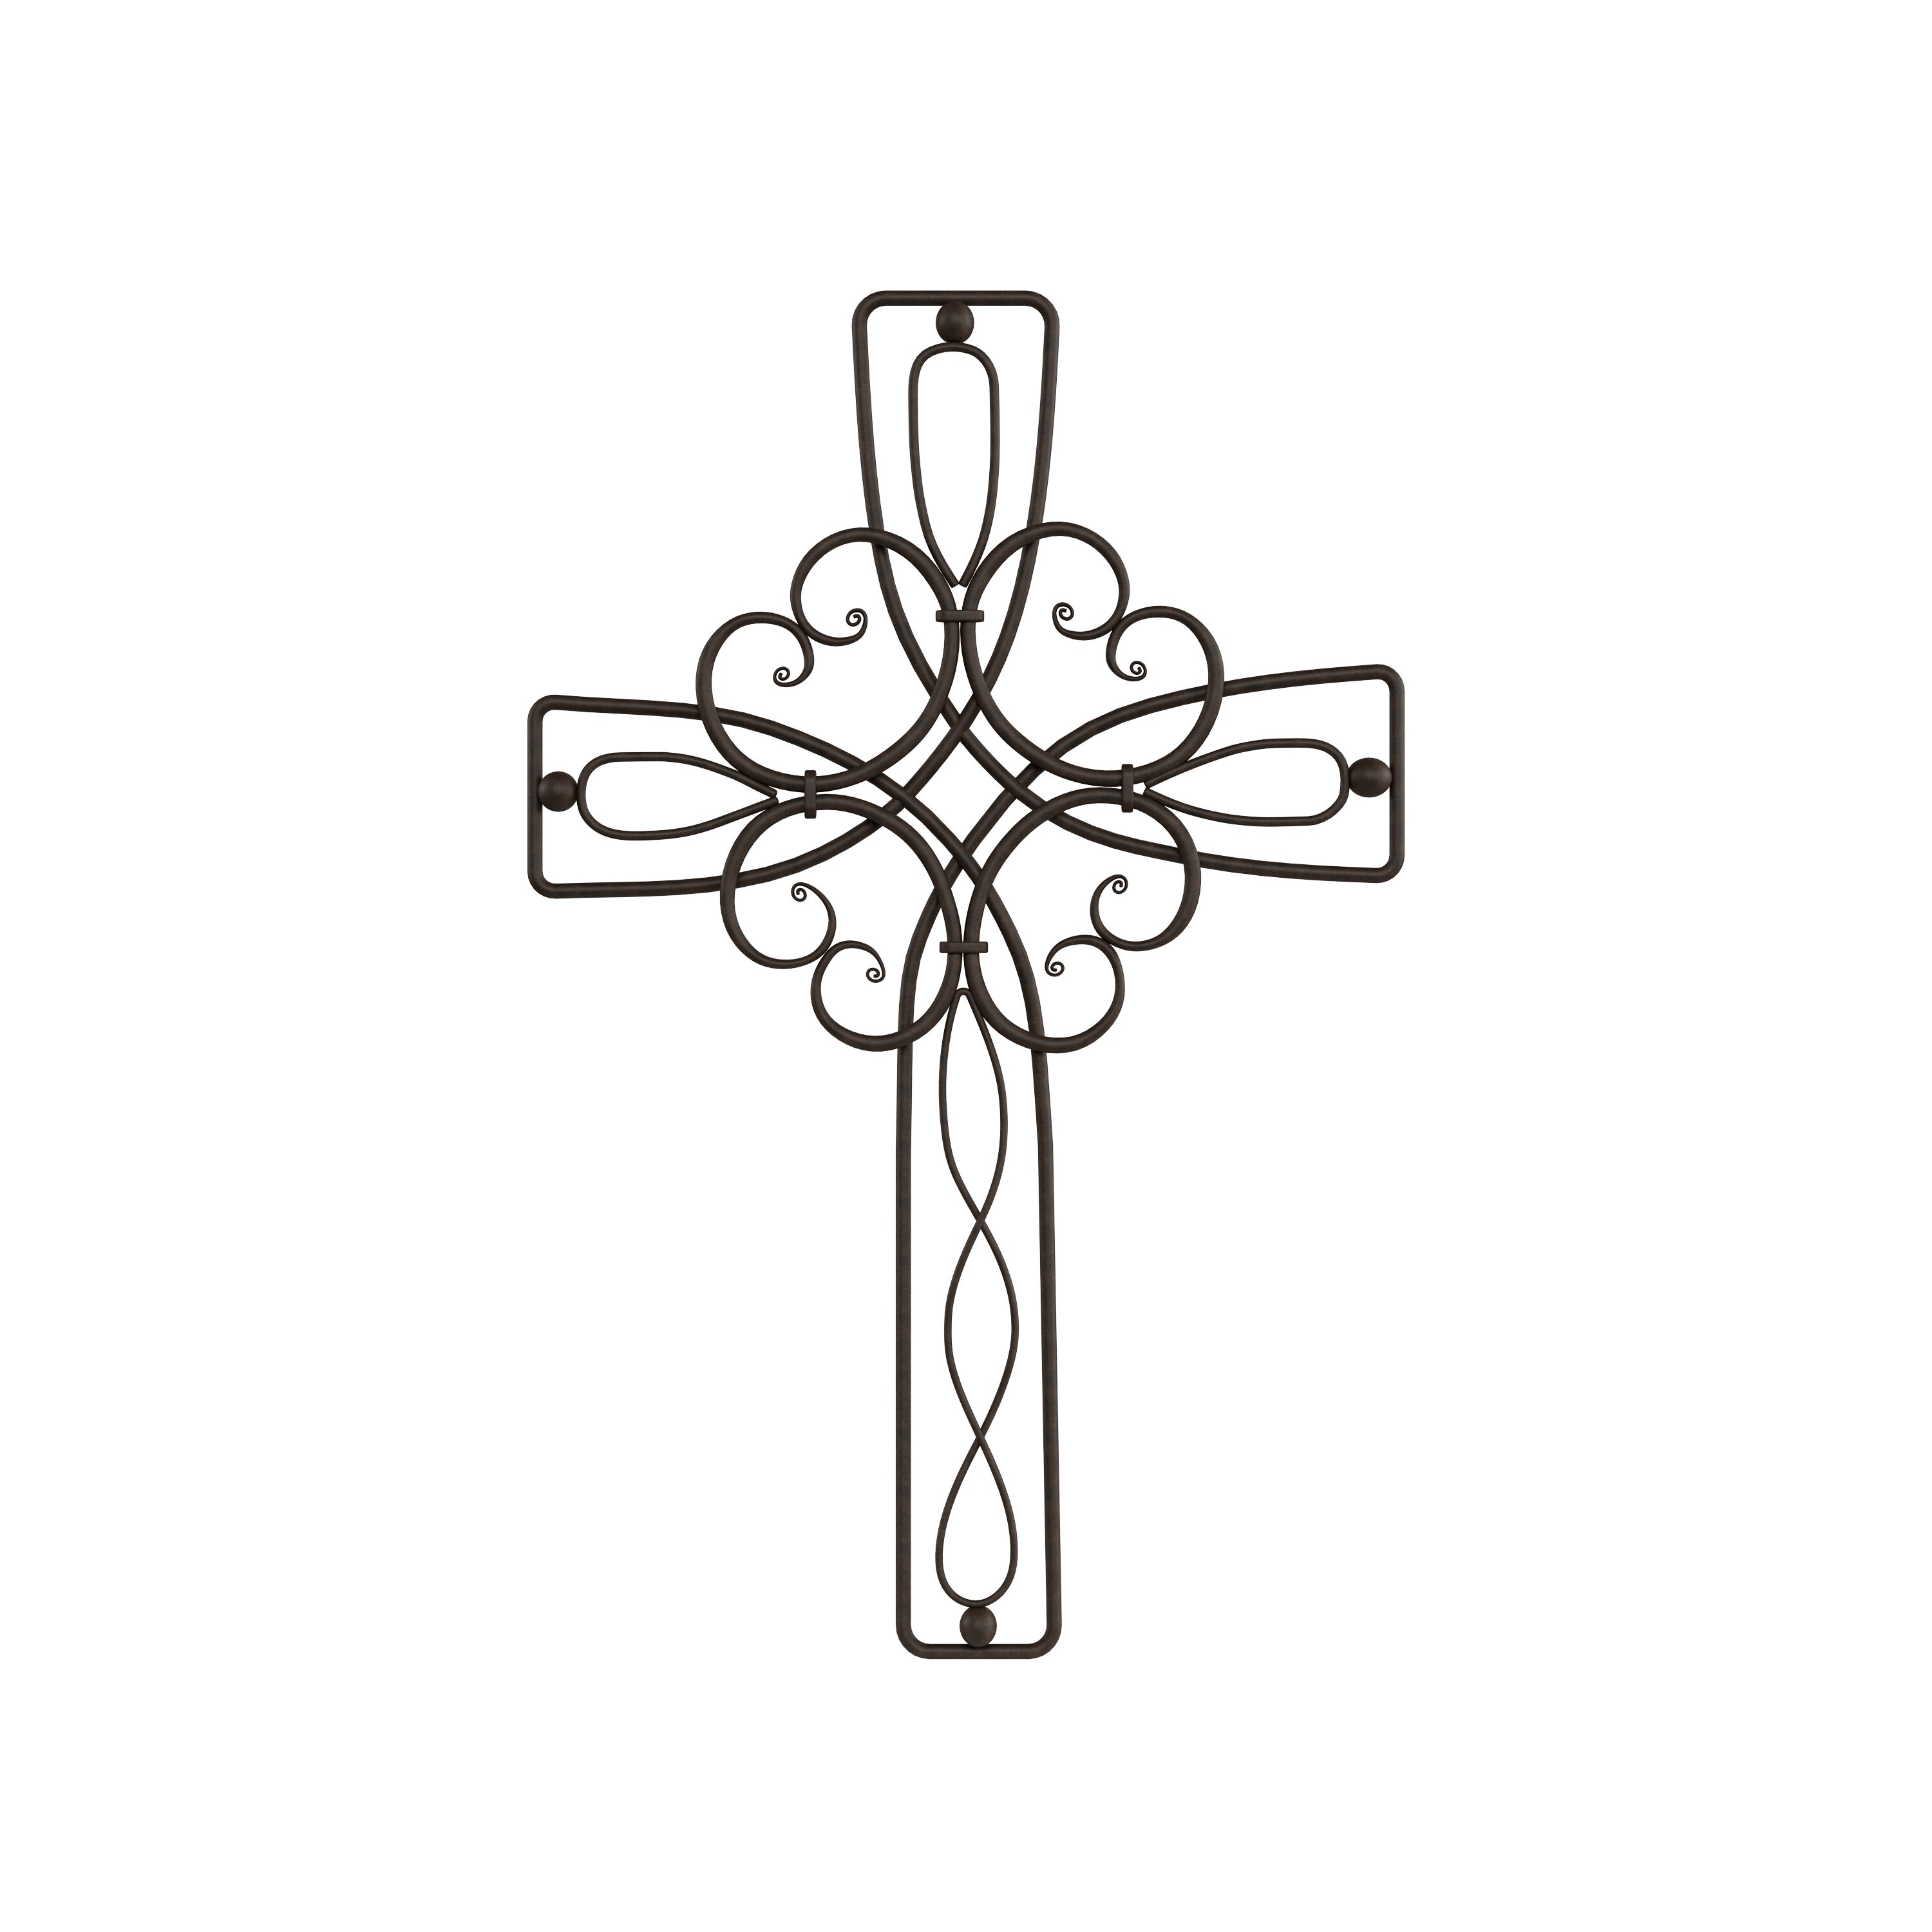 Decorative As for Me Cross Metal Wall Sculpture Art Hanging Home Decor 